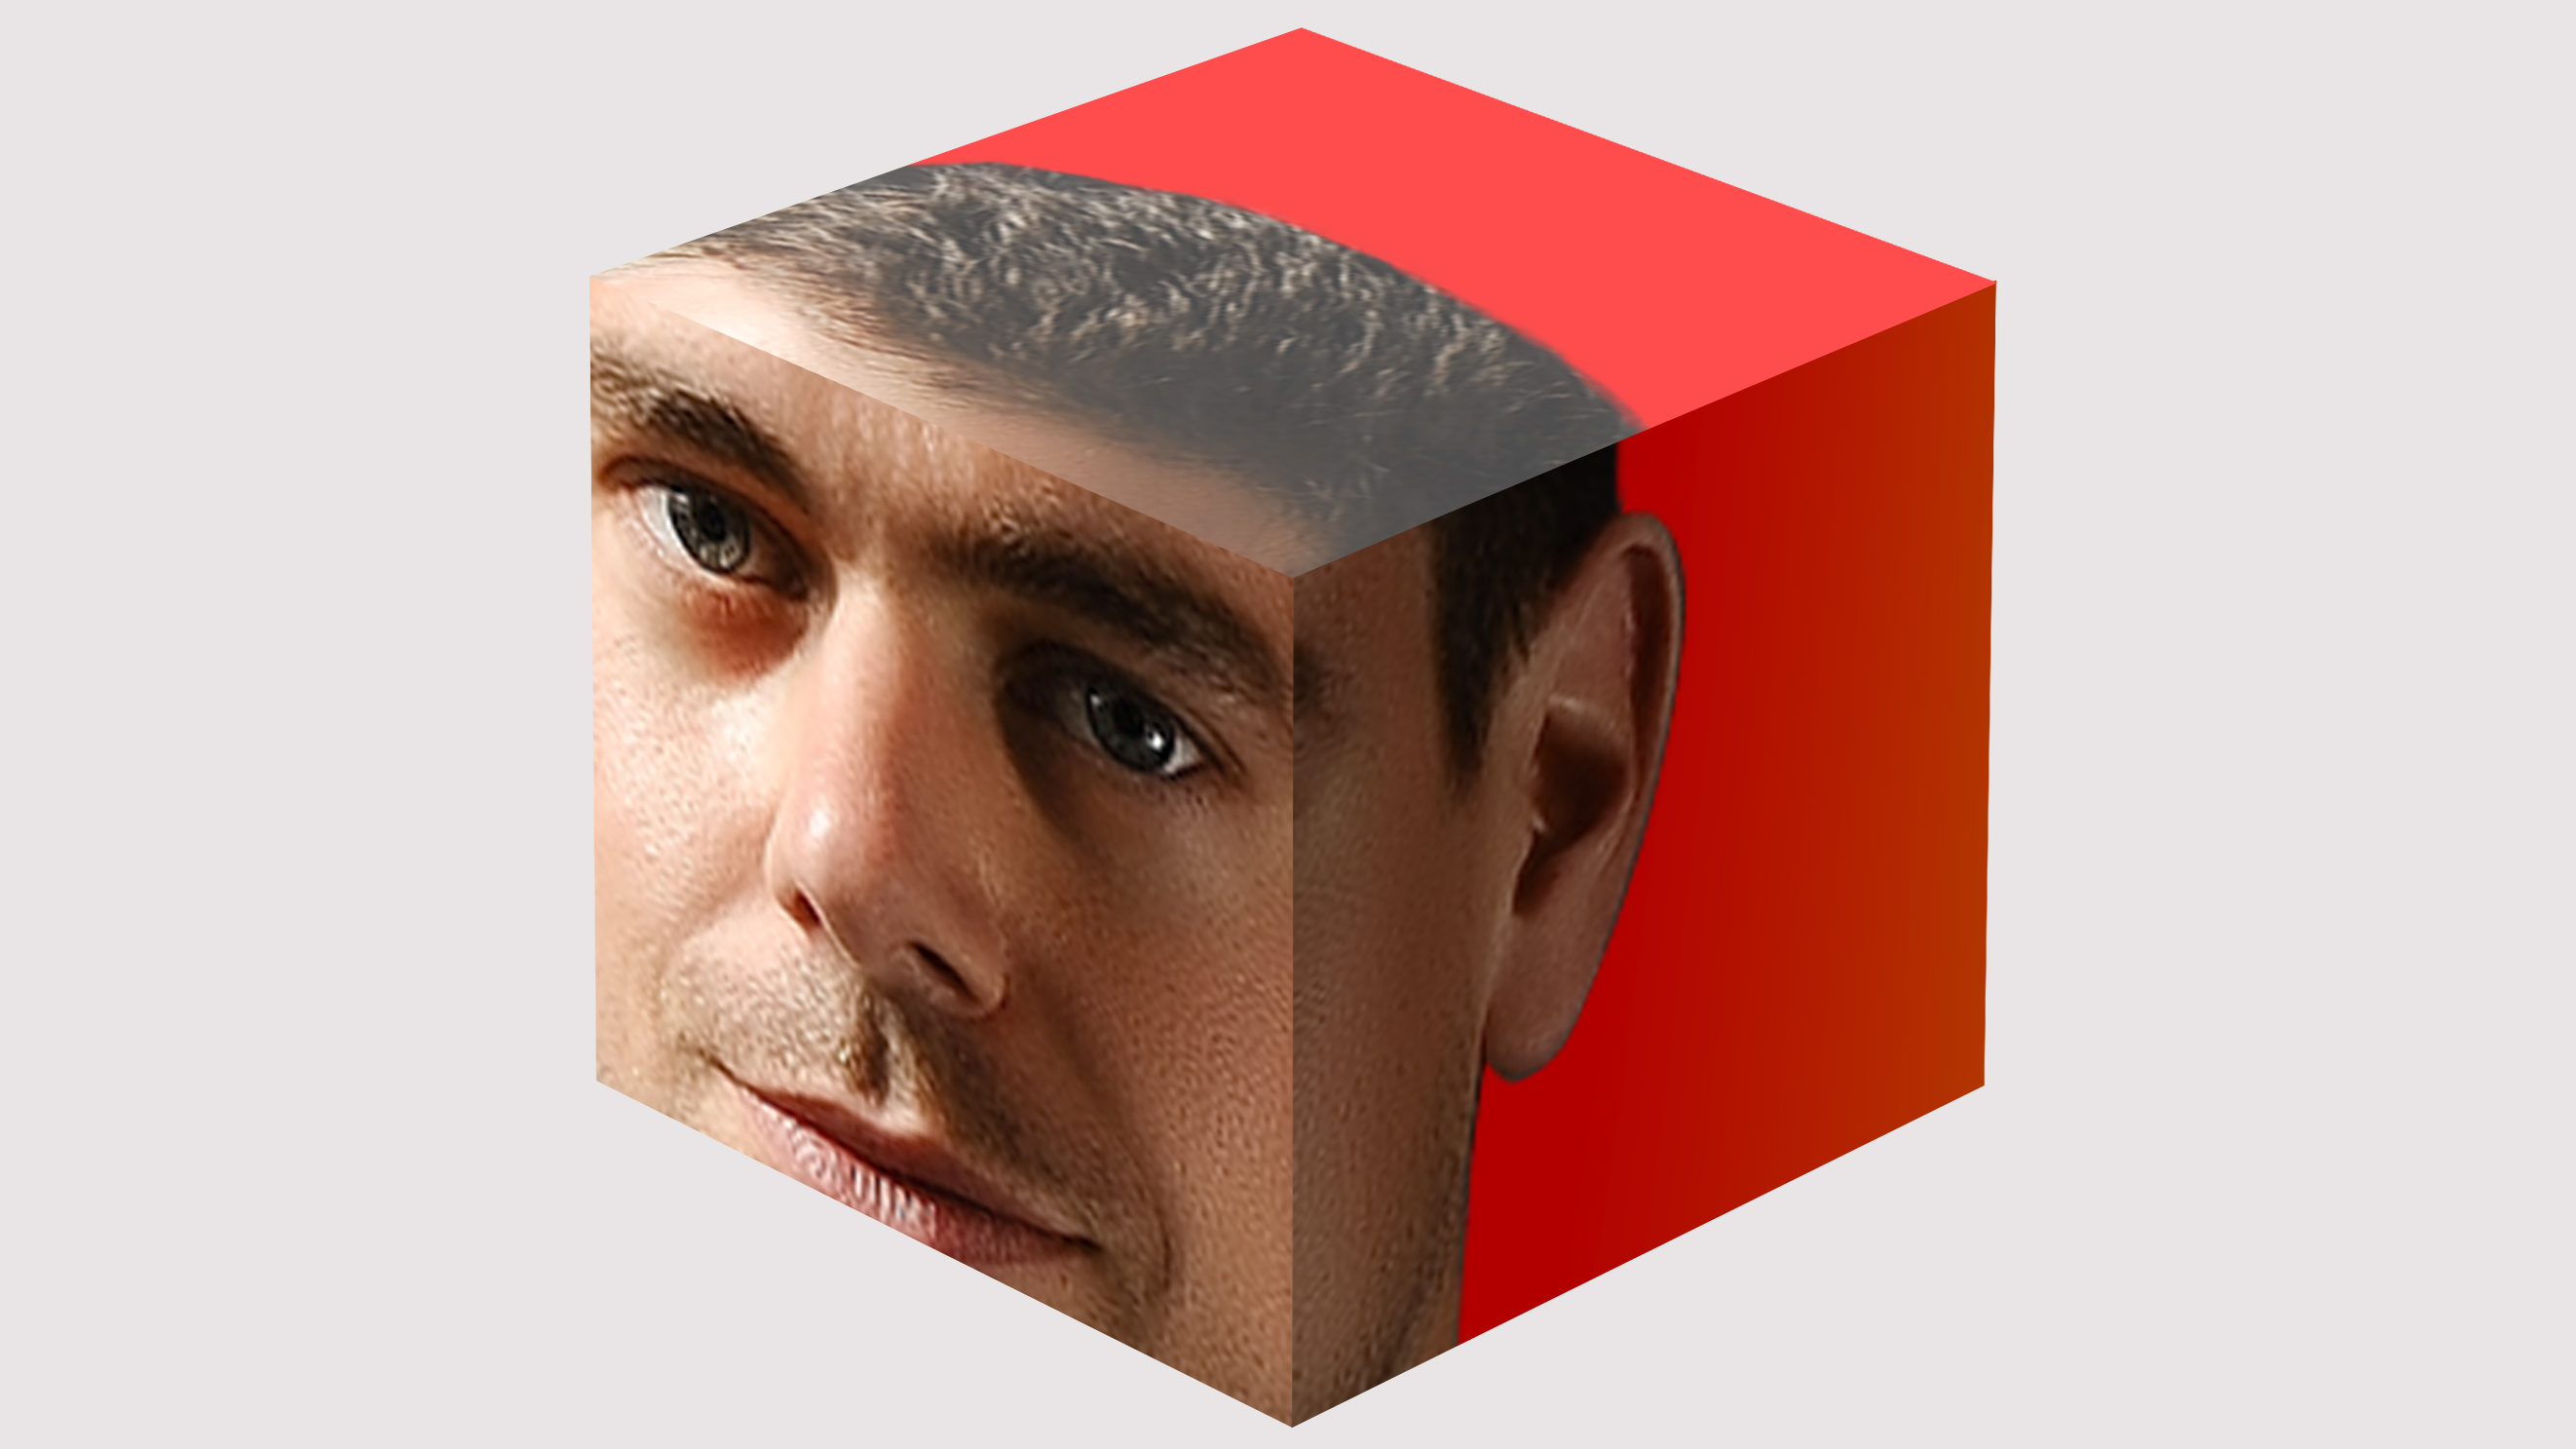 Graphic from finance company Block showing Jack Dorsey's face on a cube.